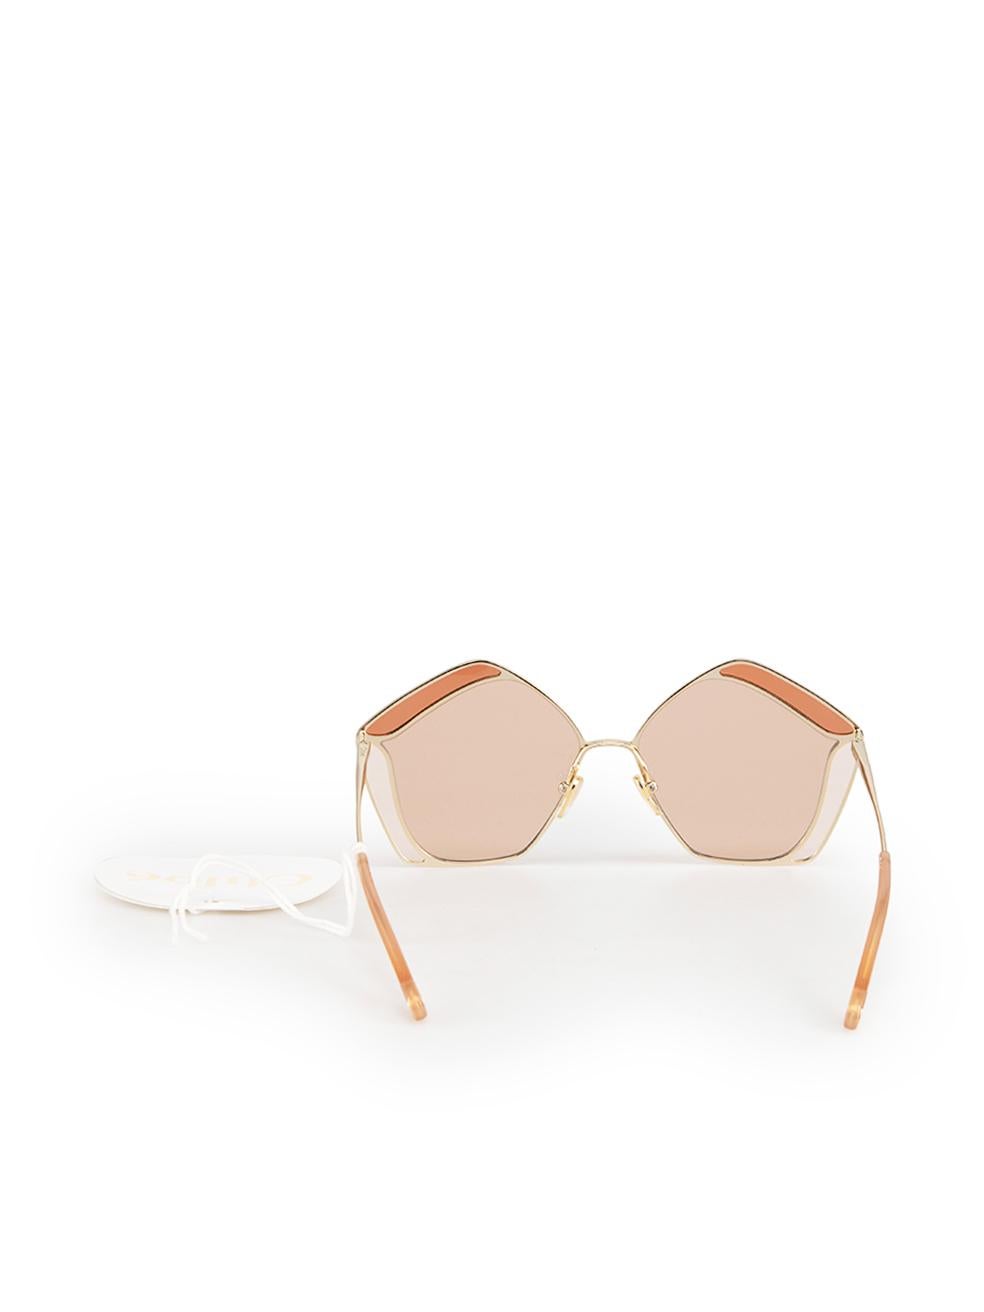 Chloé Pink Gemma Oversized Sunglasses In New Condition For Sale In London, GB